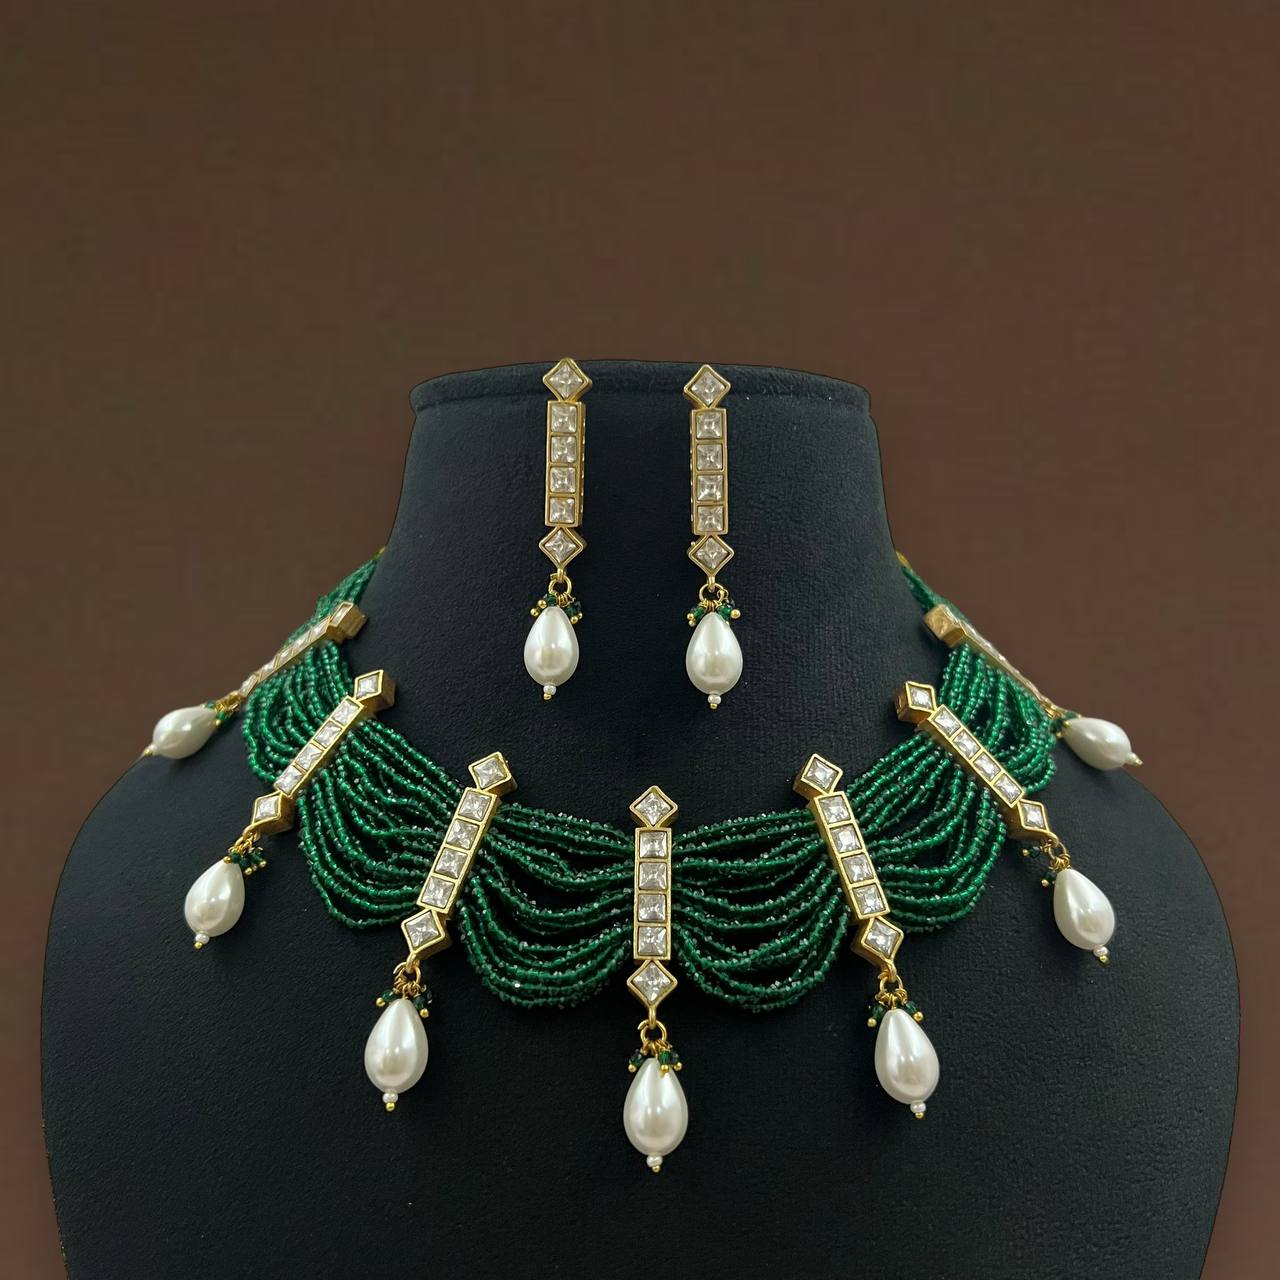 Exclusive beads necklace | Latest Indian jewelry